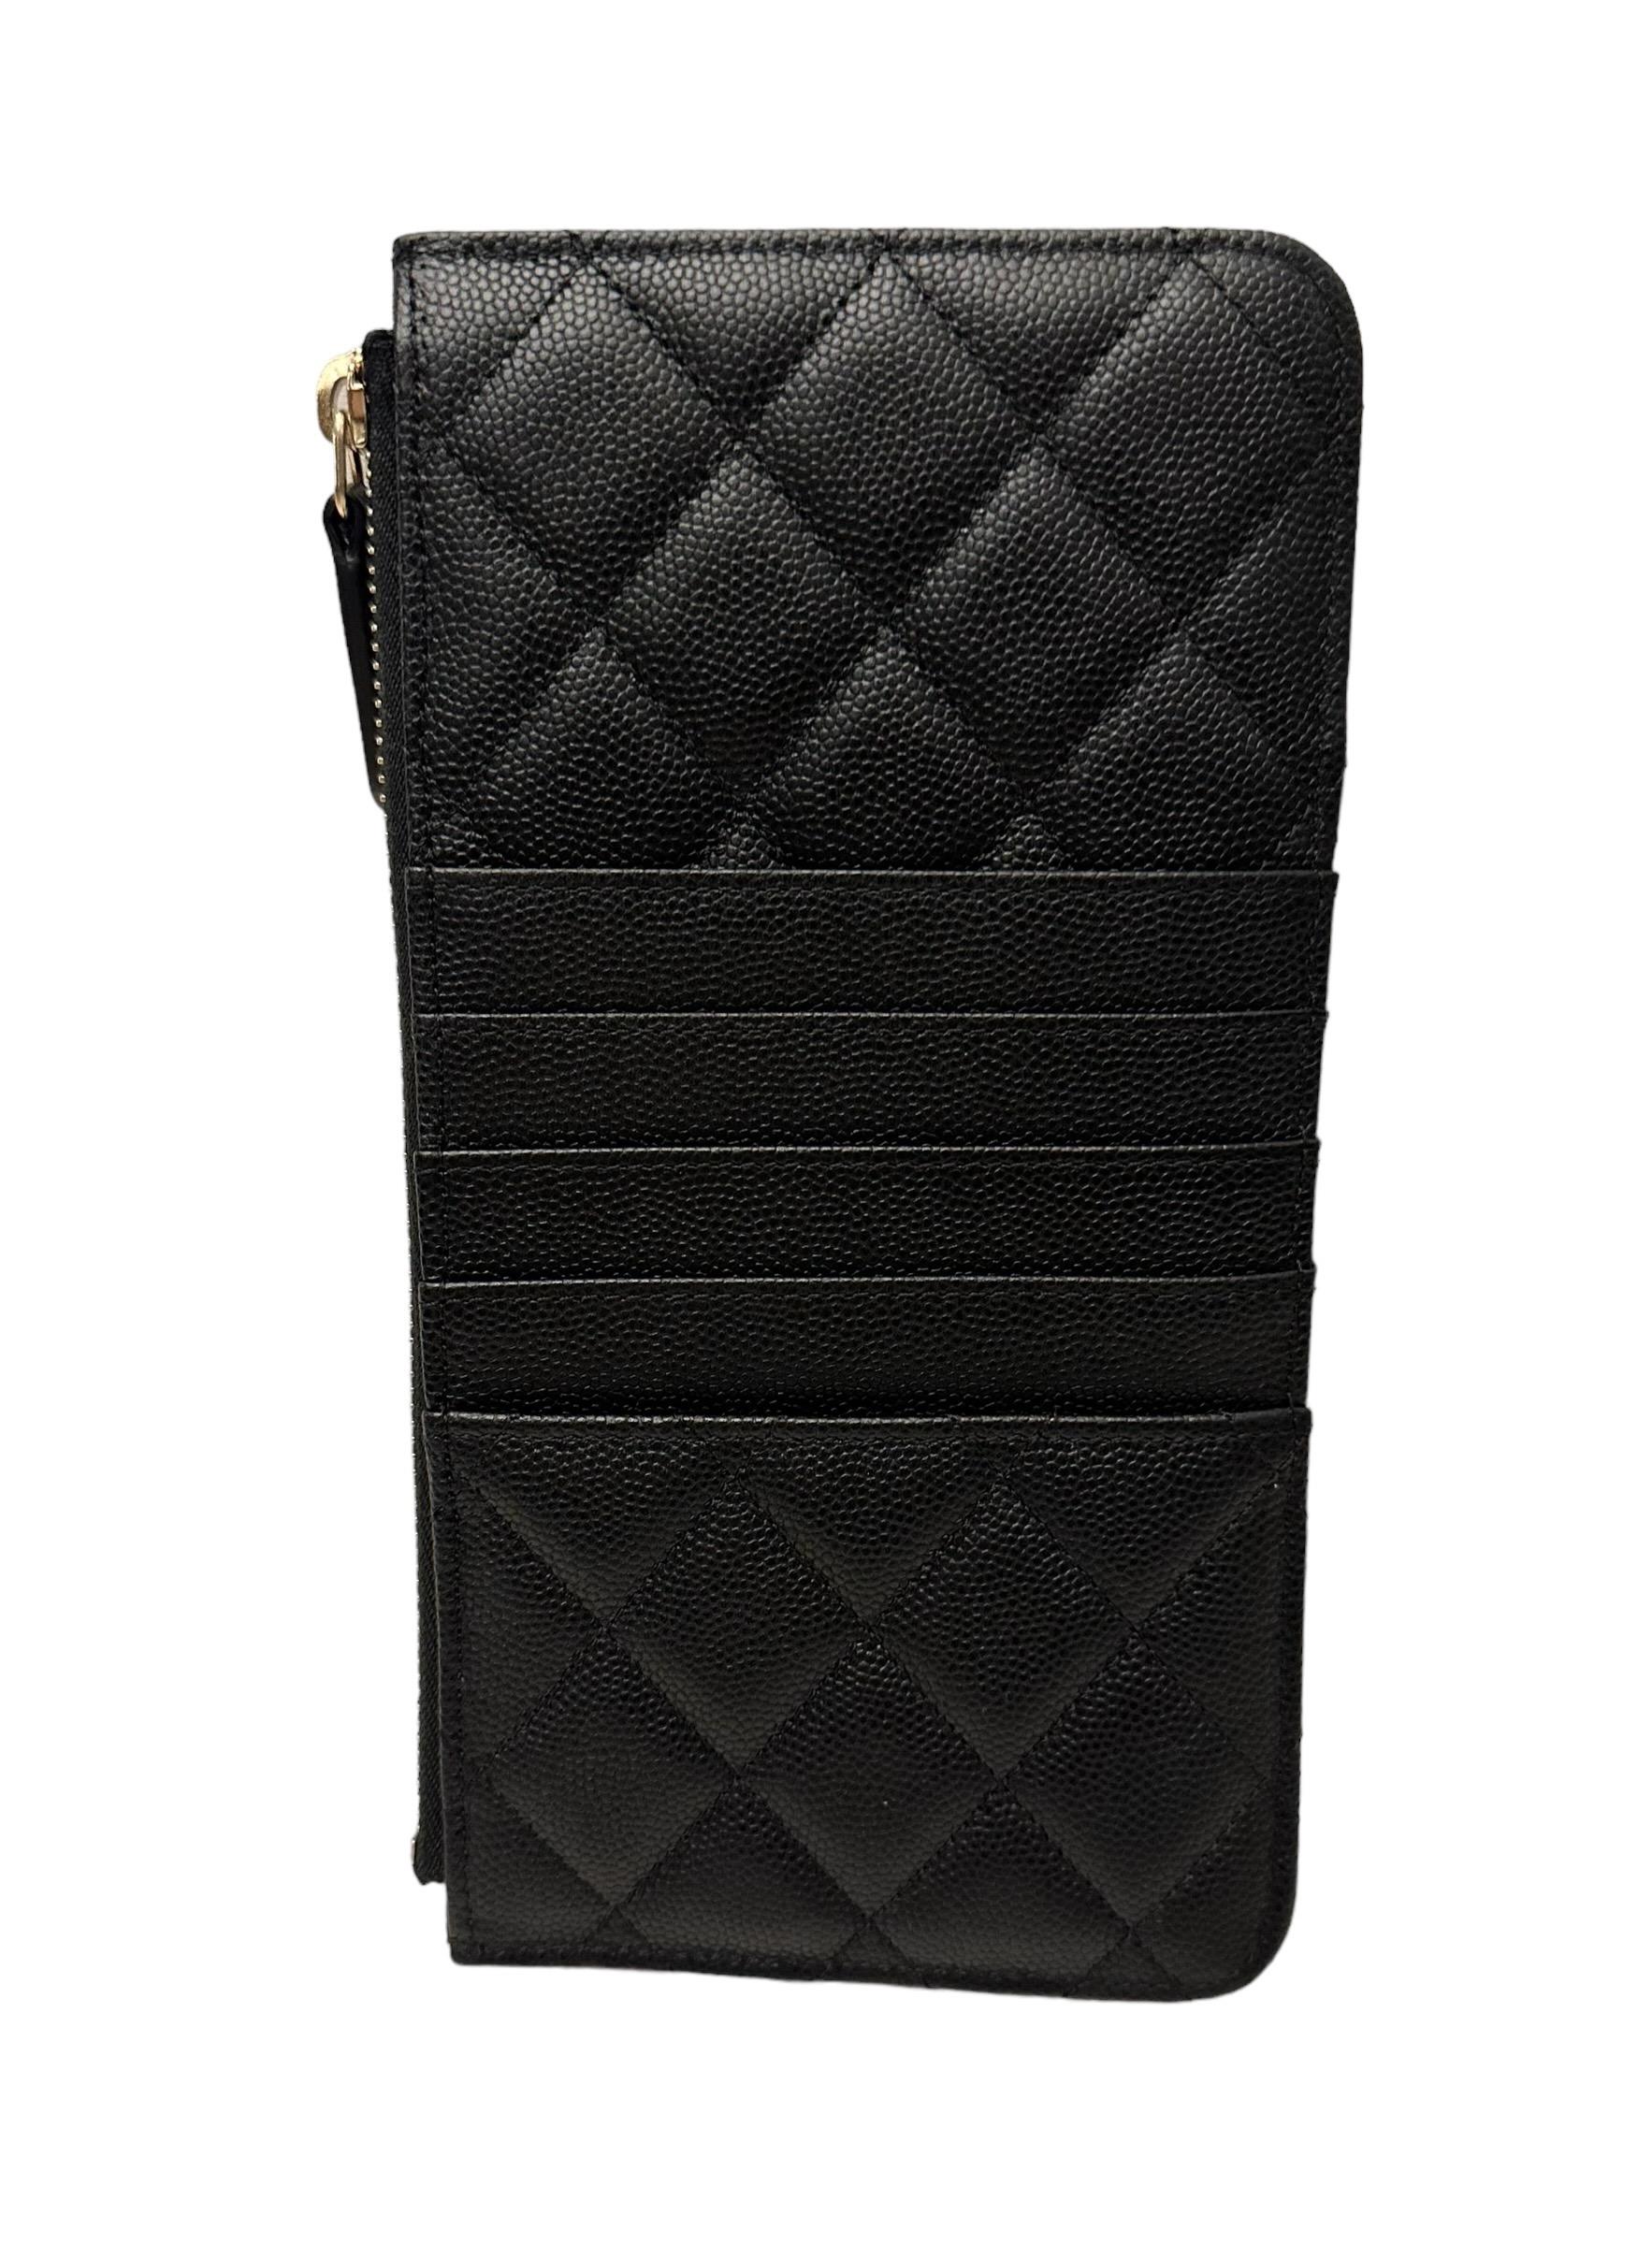 This pre-owned but new flat wallet from the house of Chanel is crafted in the iconic black caviar leather.
It features the signature interlocking CC logo, a slip pocket to the front, card slots to the back, a top zip fastening to the main